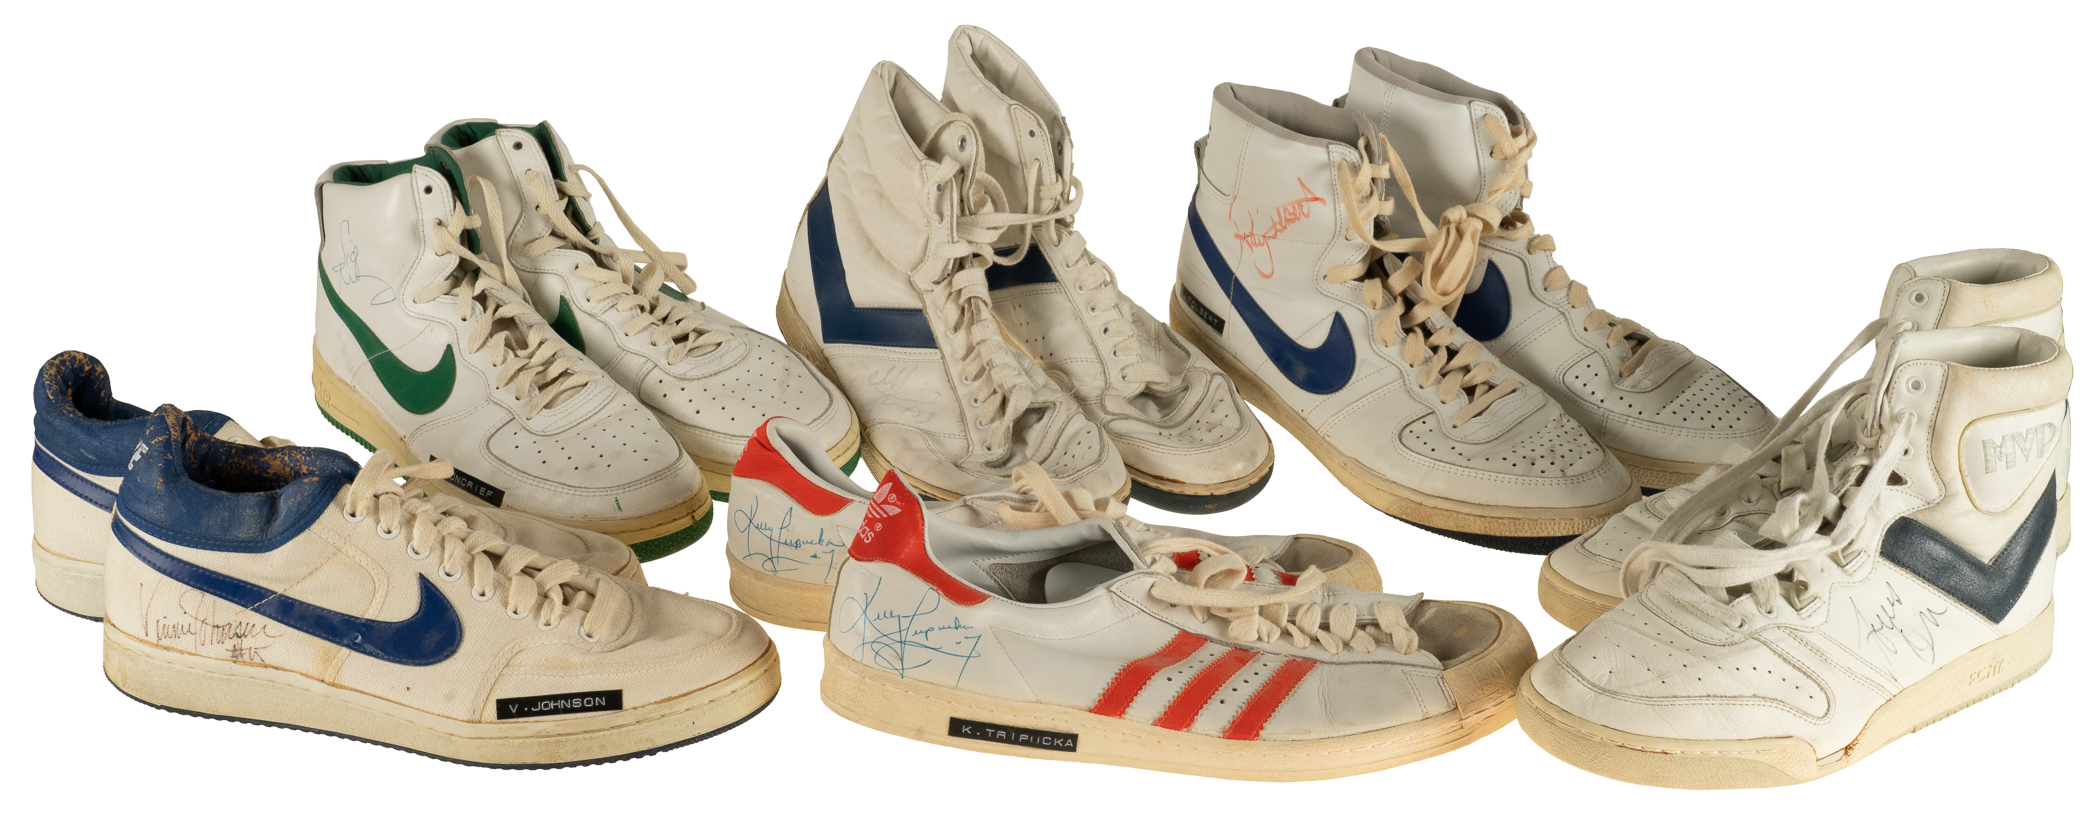 Lot 3228 includes 18 pairs of game-worn sneakers that Edelmann collected during his time as a ball boy, one of which is from Hall of Famer Sidney Moncrief